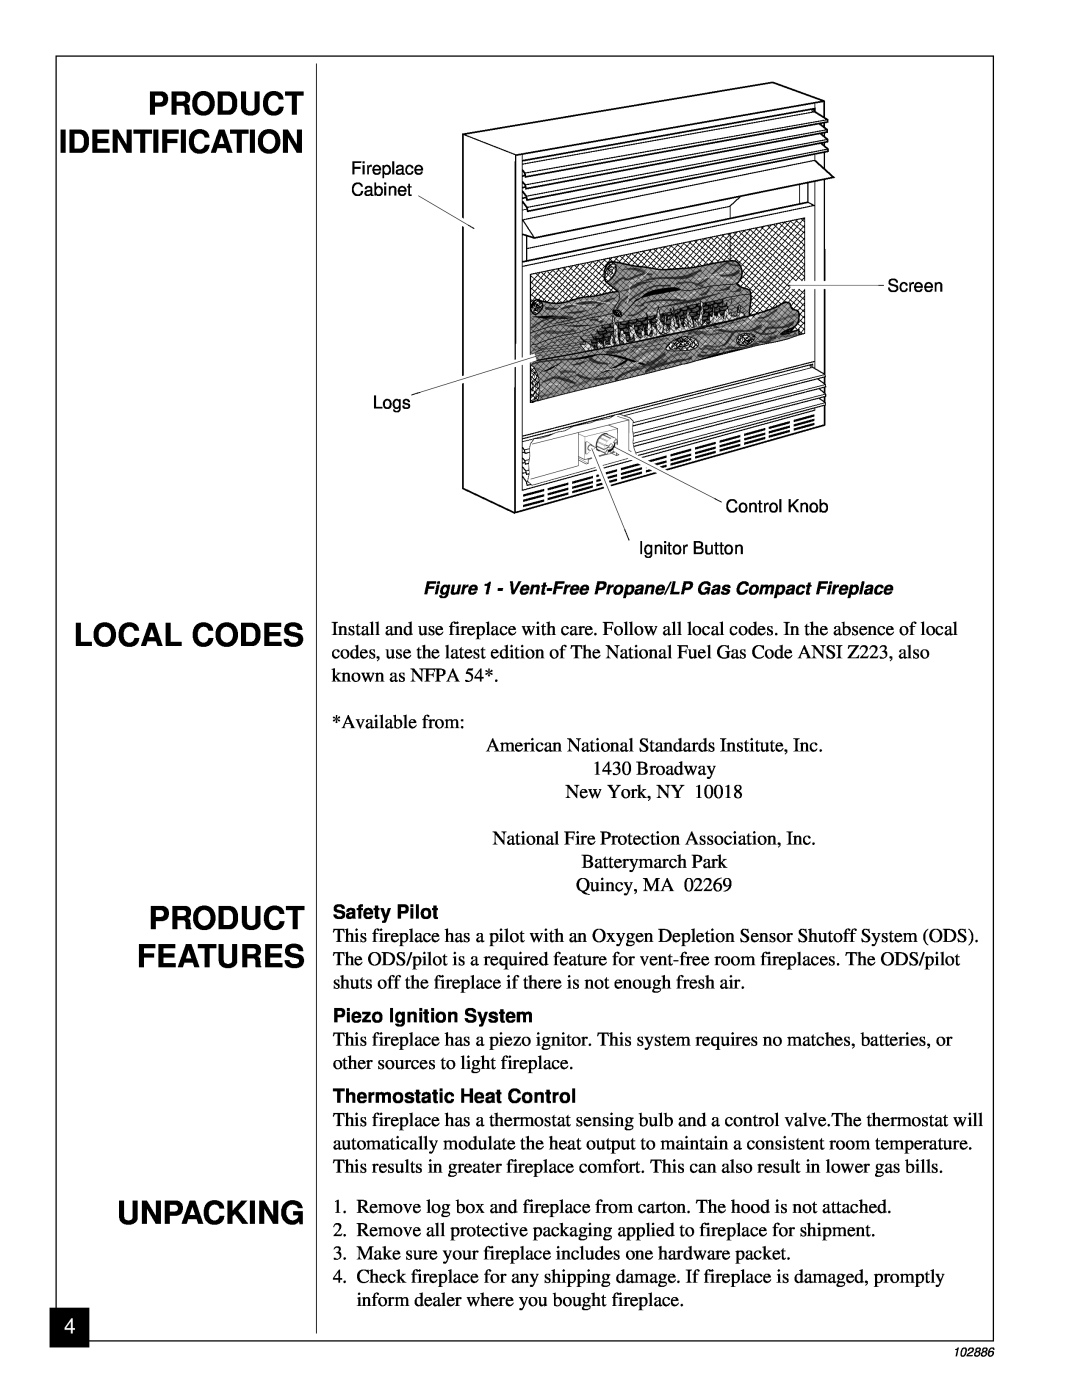 Vanguard Heating VMH26TPB installation manual Local Codes Product Features Unpacking, Product Identification 